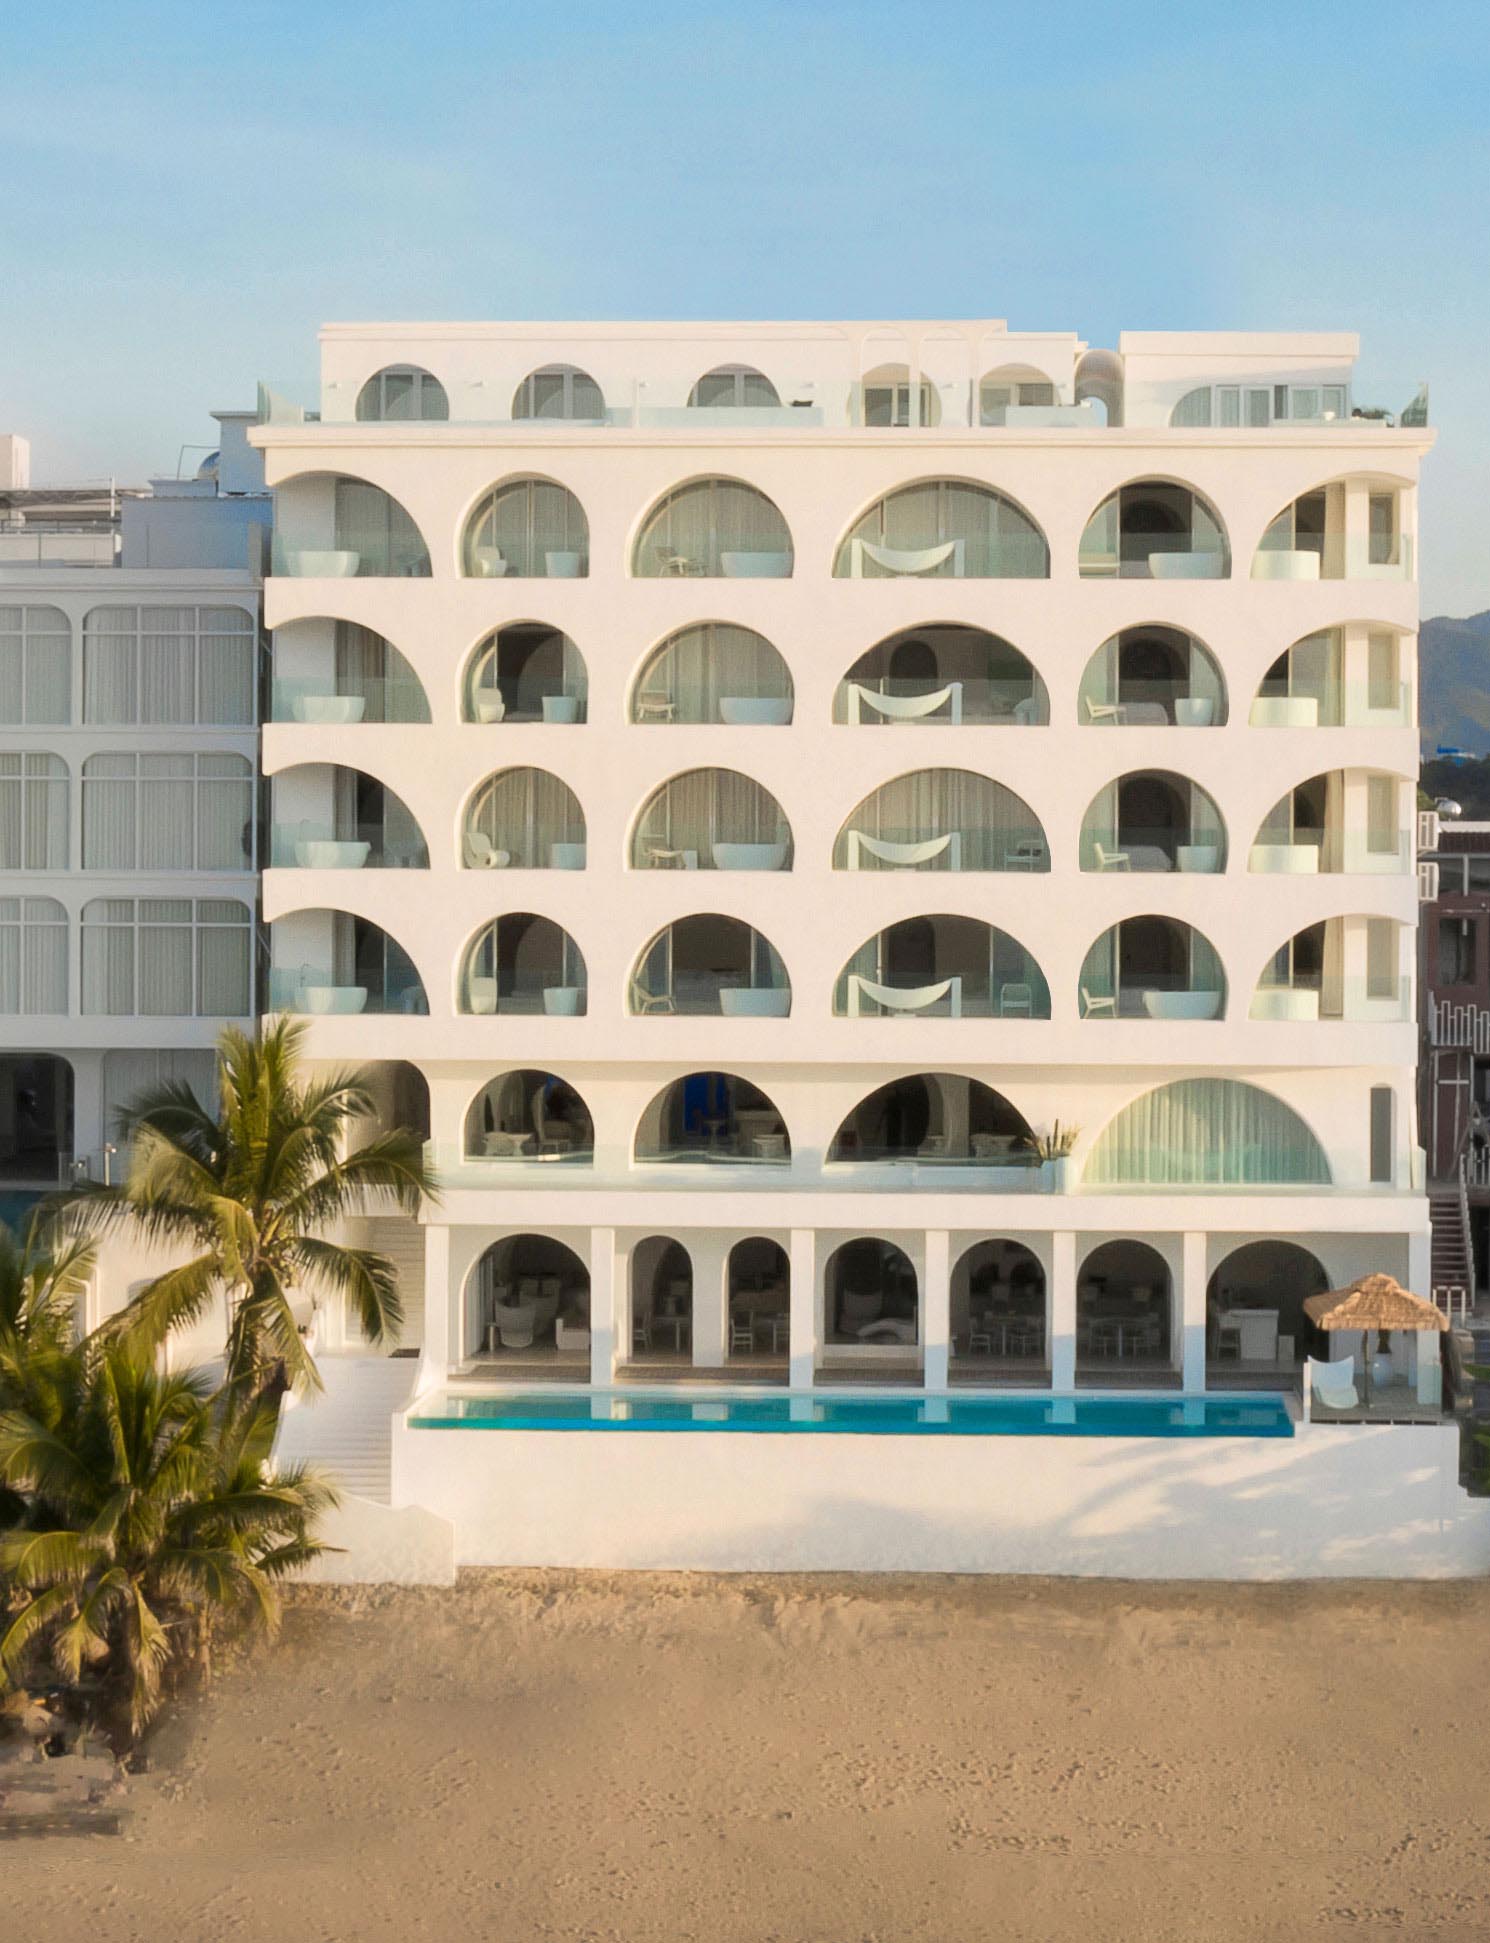 A modern hotel with a white exterior that includes arches of different shapes.